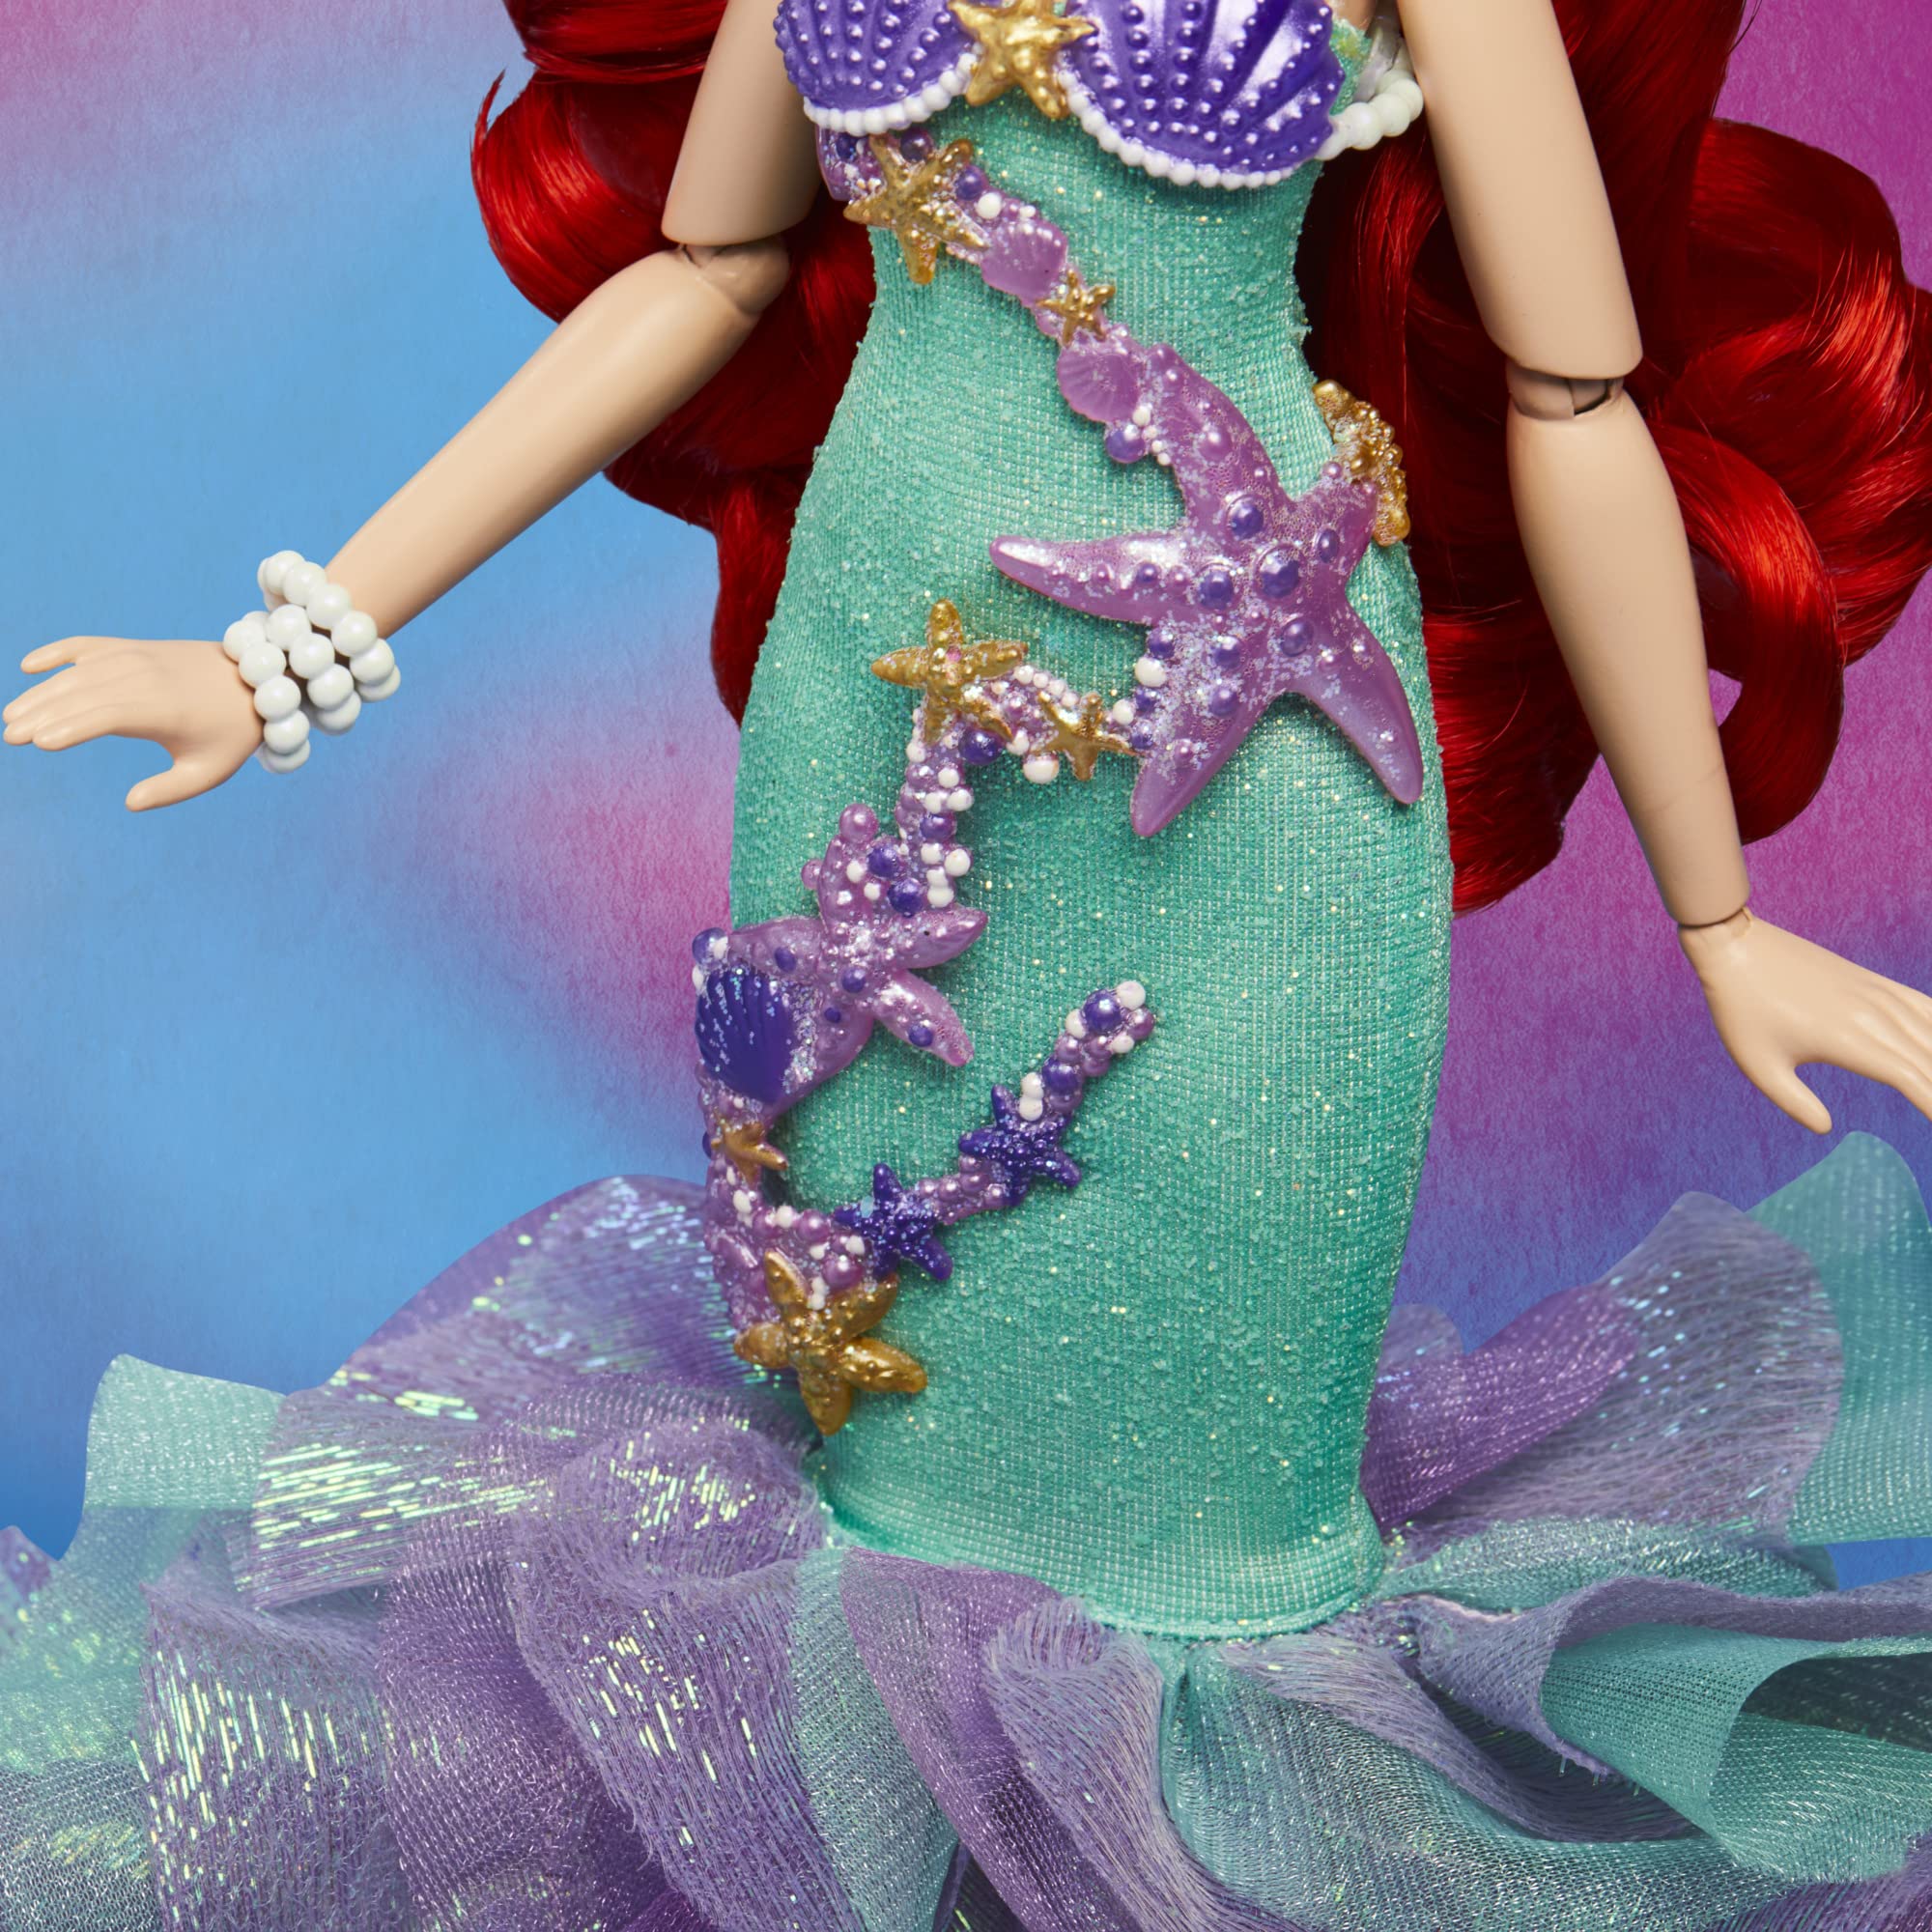 Disney Princess Style Series Ariel Fashion Doll, Deluxe Collector Doll with Accessories, The Little Mermaid Toy for Kids Ages 6 and Up